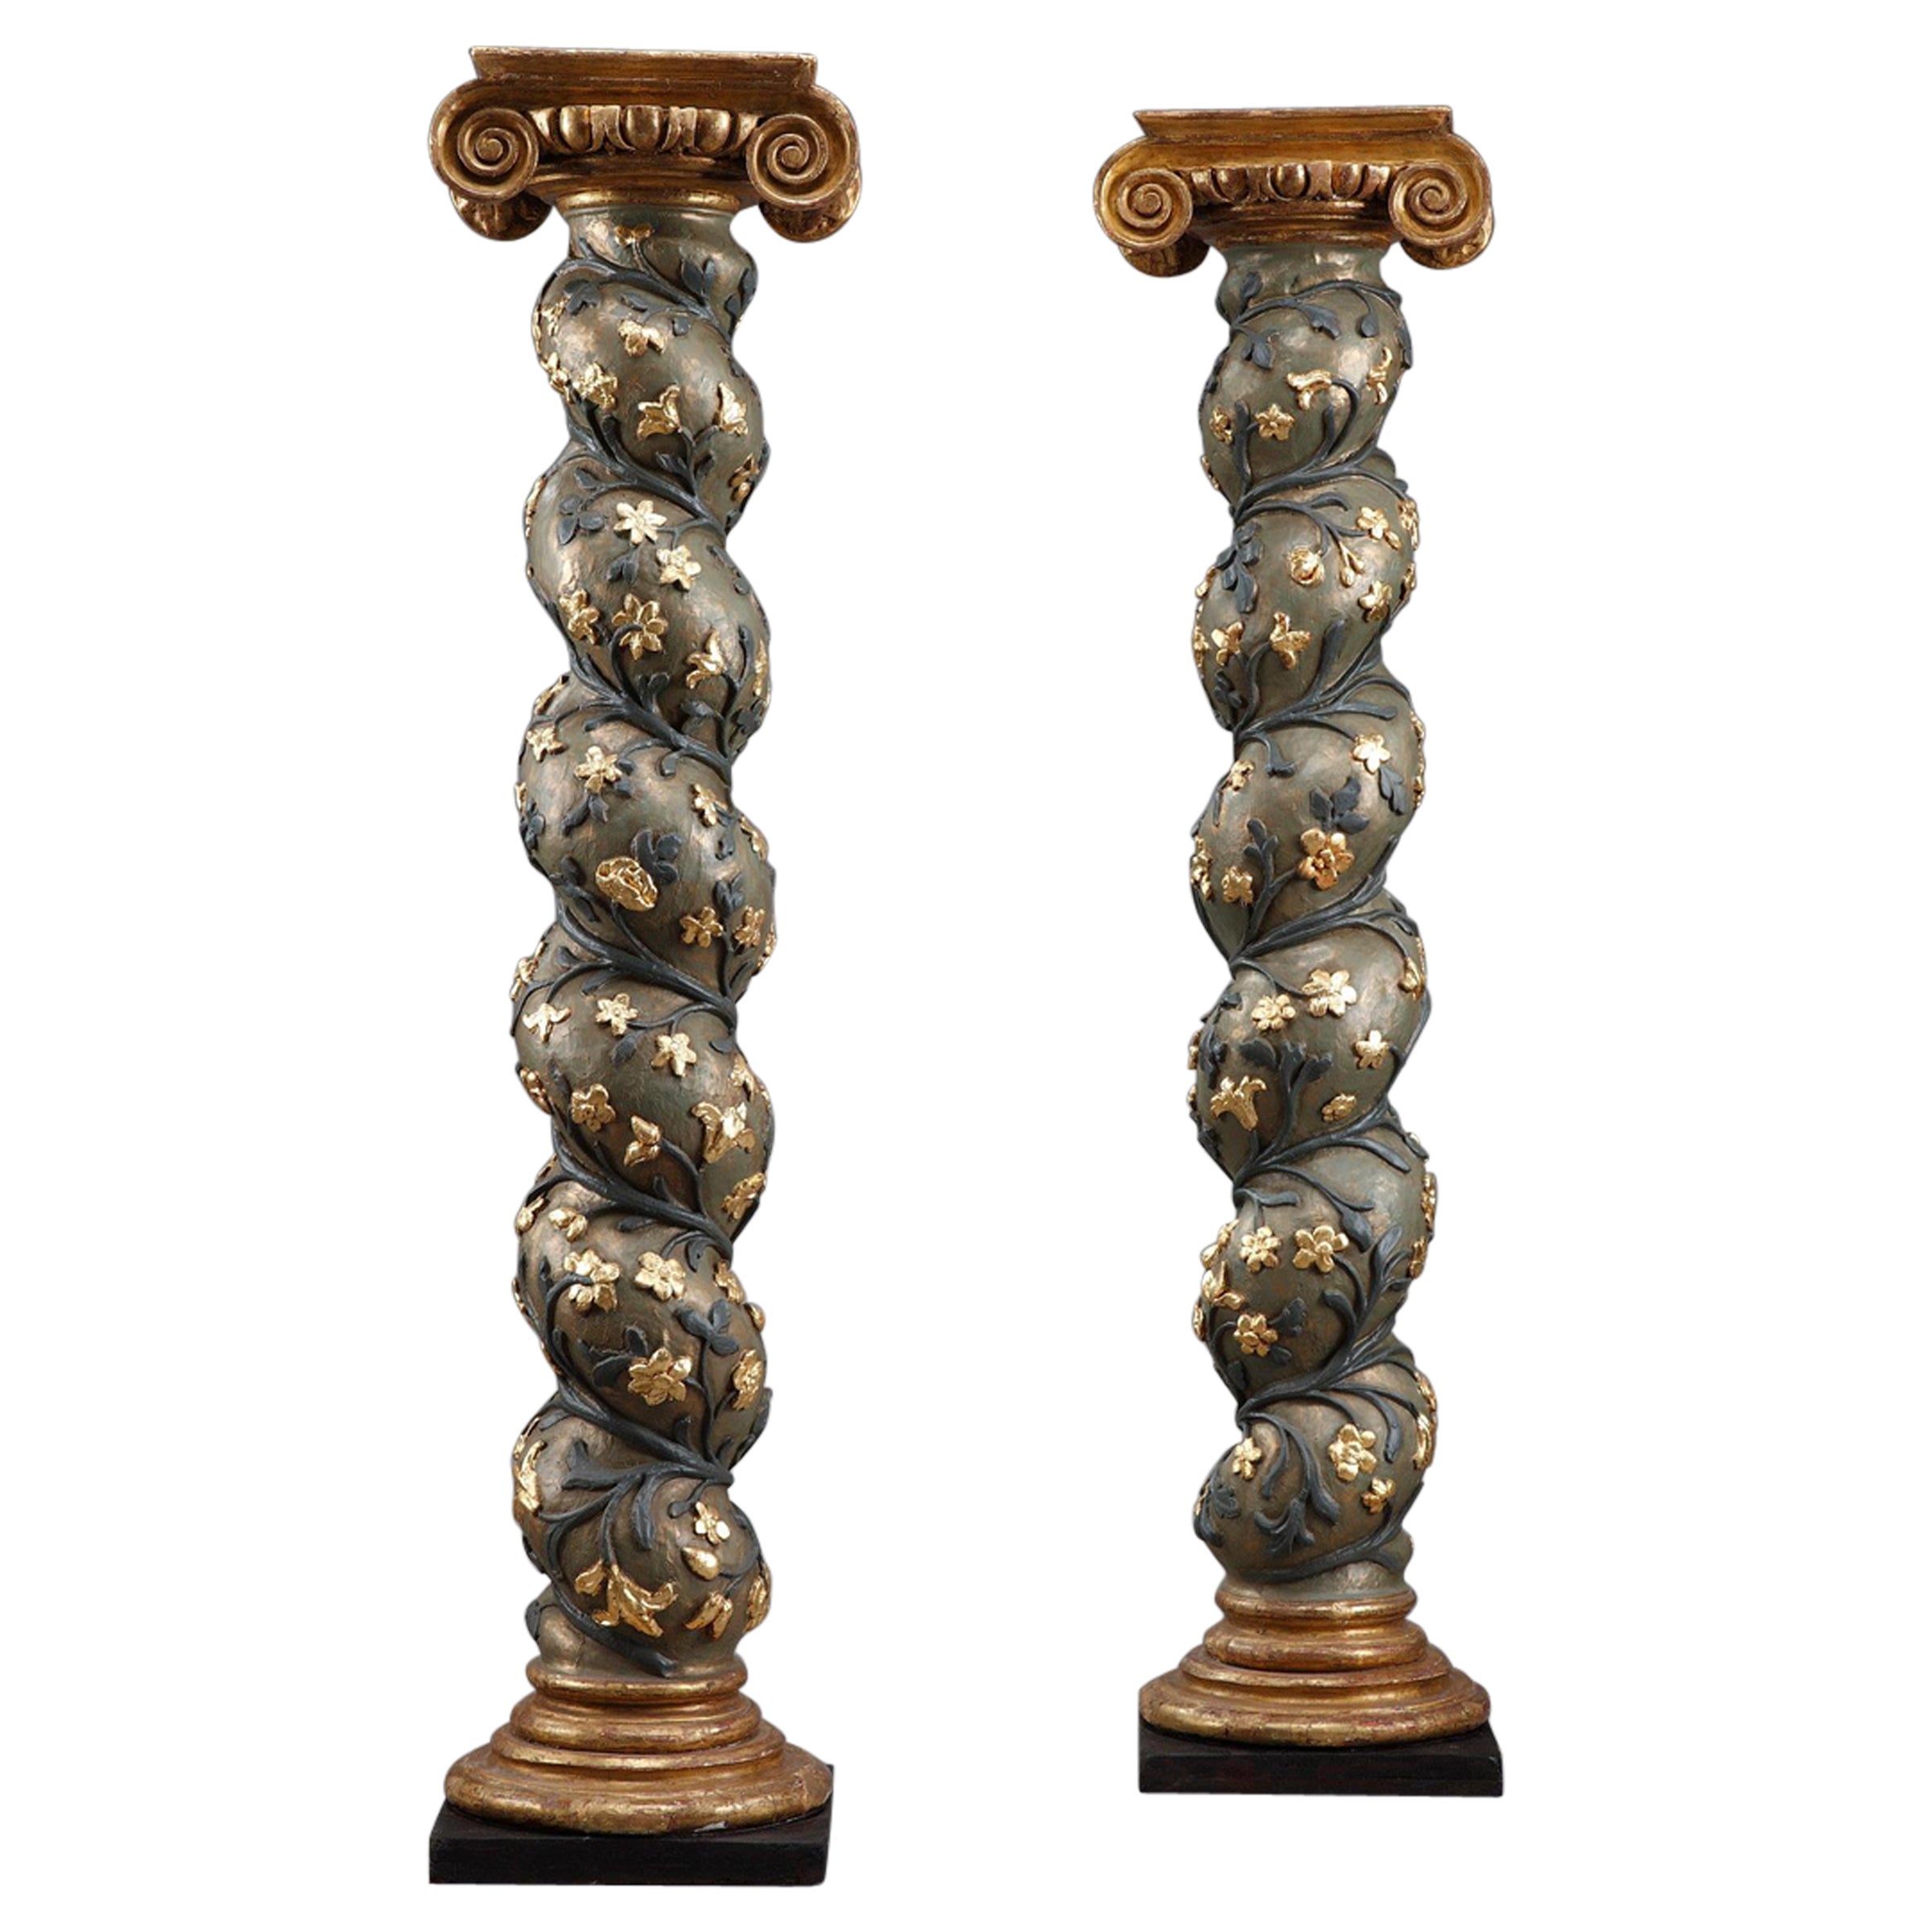 Pair of Baroque Twisted Columns, 17th Century